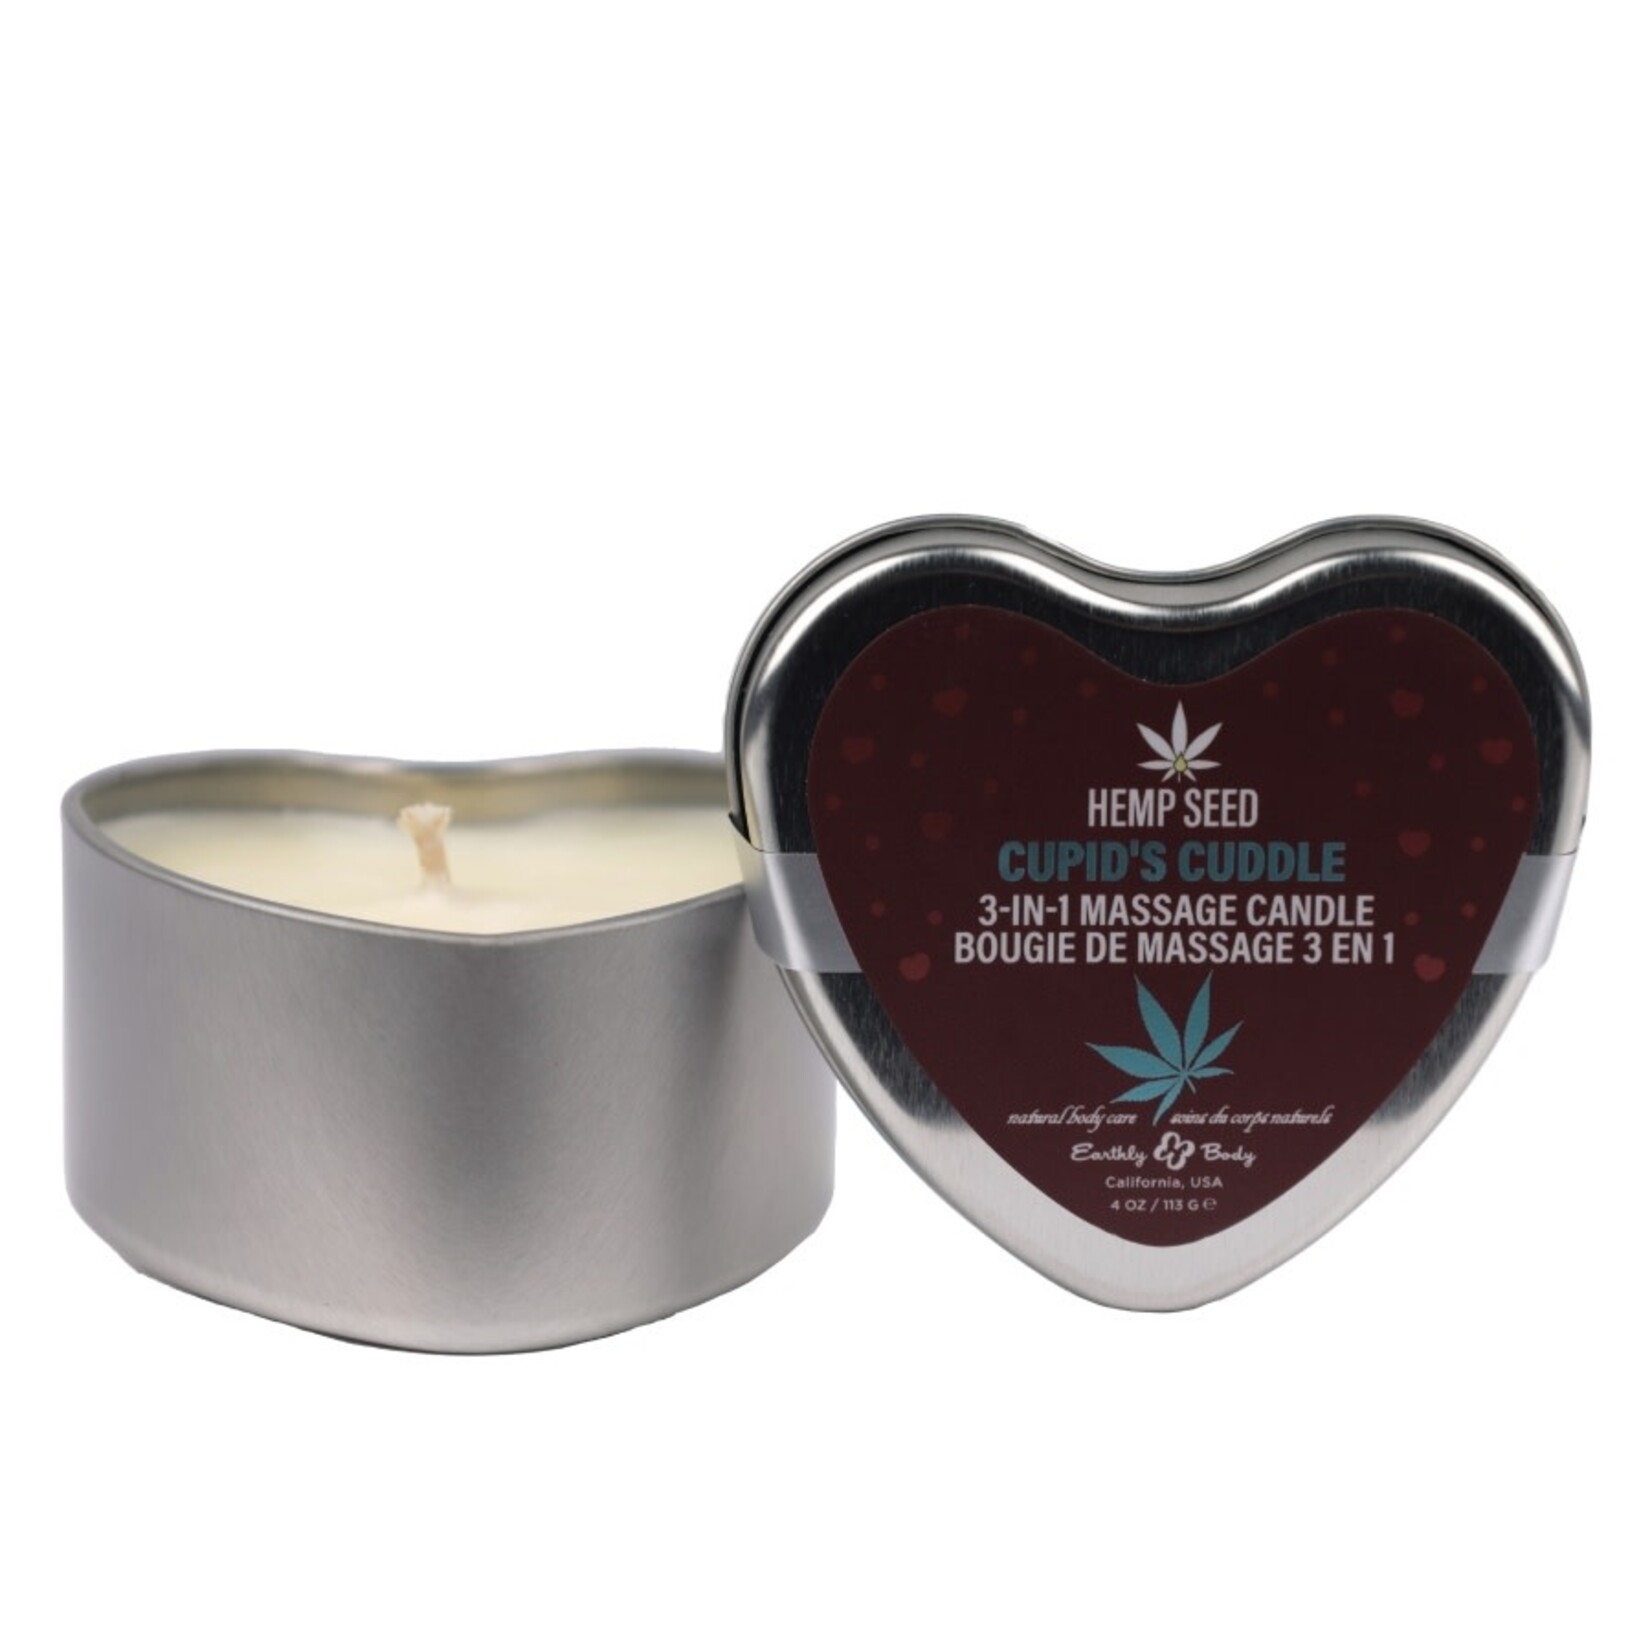 EARTHLY BODY HEMP SEED 3-IN-1 VALENTINES DAY CANDLE 4OZ/113G CUPID'S CUDDLE